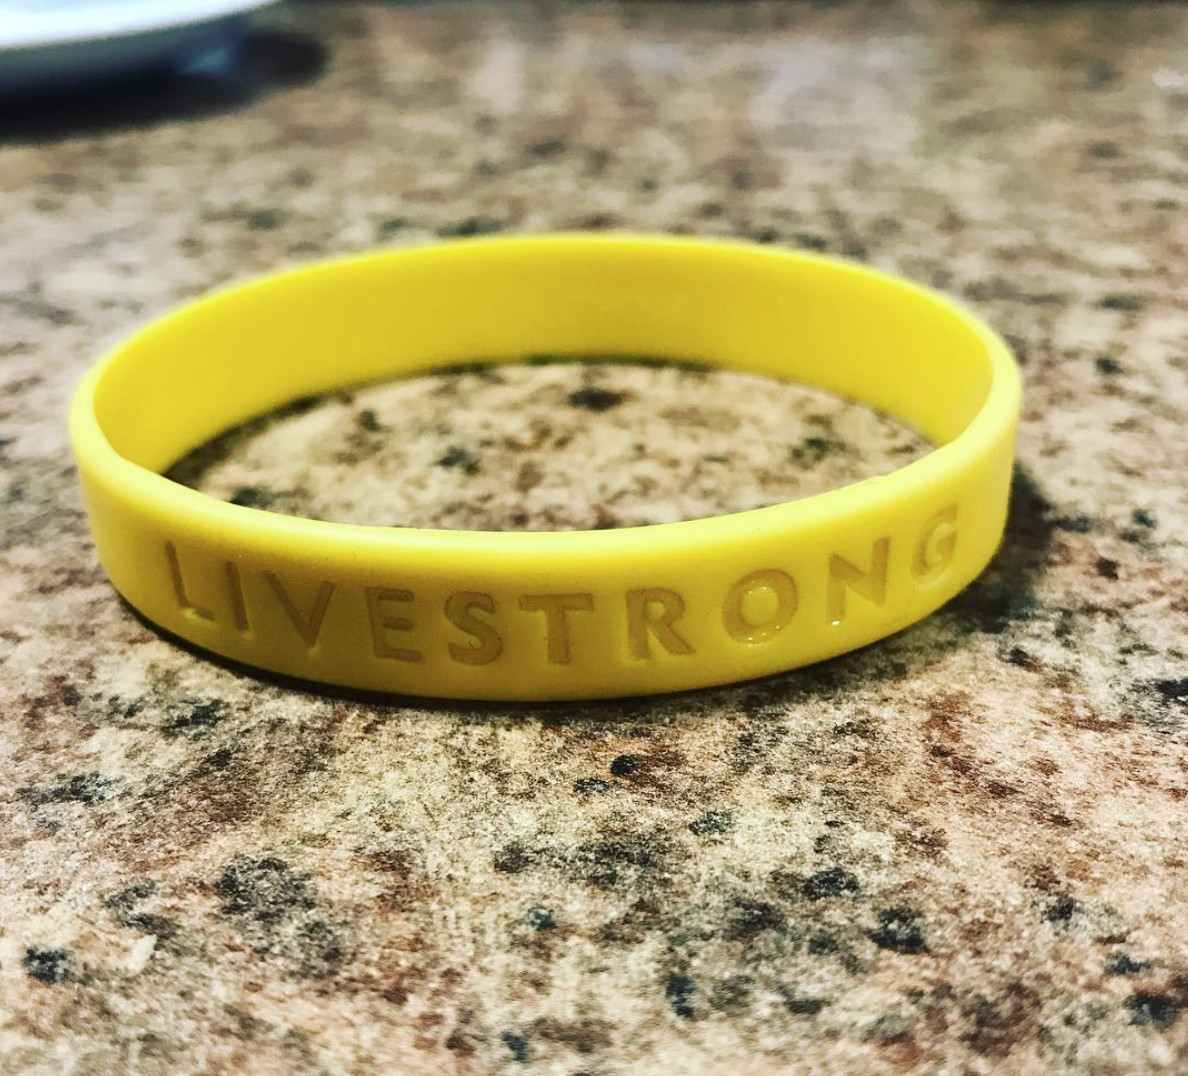 Rubber bands for everything. Breast cancer, Livestrong, Emo. Band geeks united. Eventually they were so overdone we were over them (but you still have your favorite in a box somewhere in the attic)